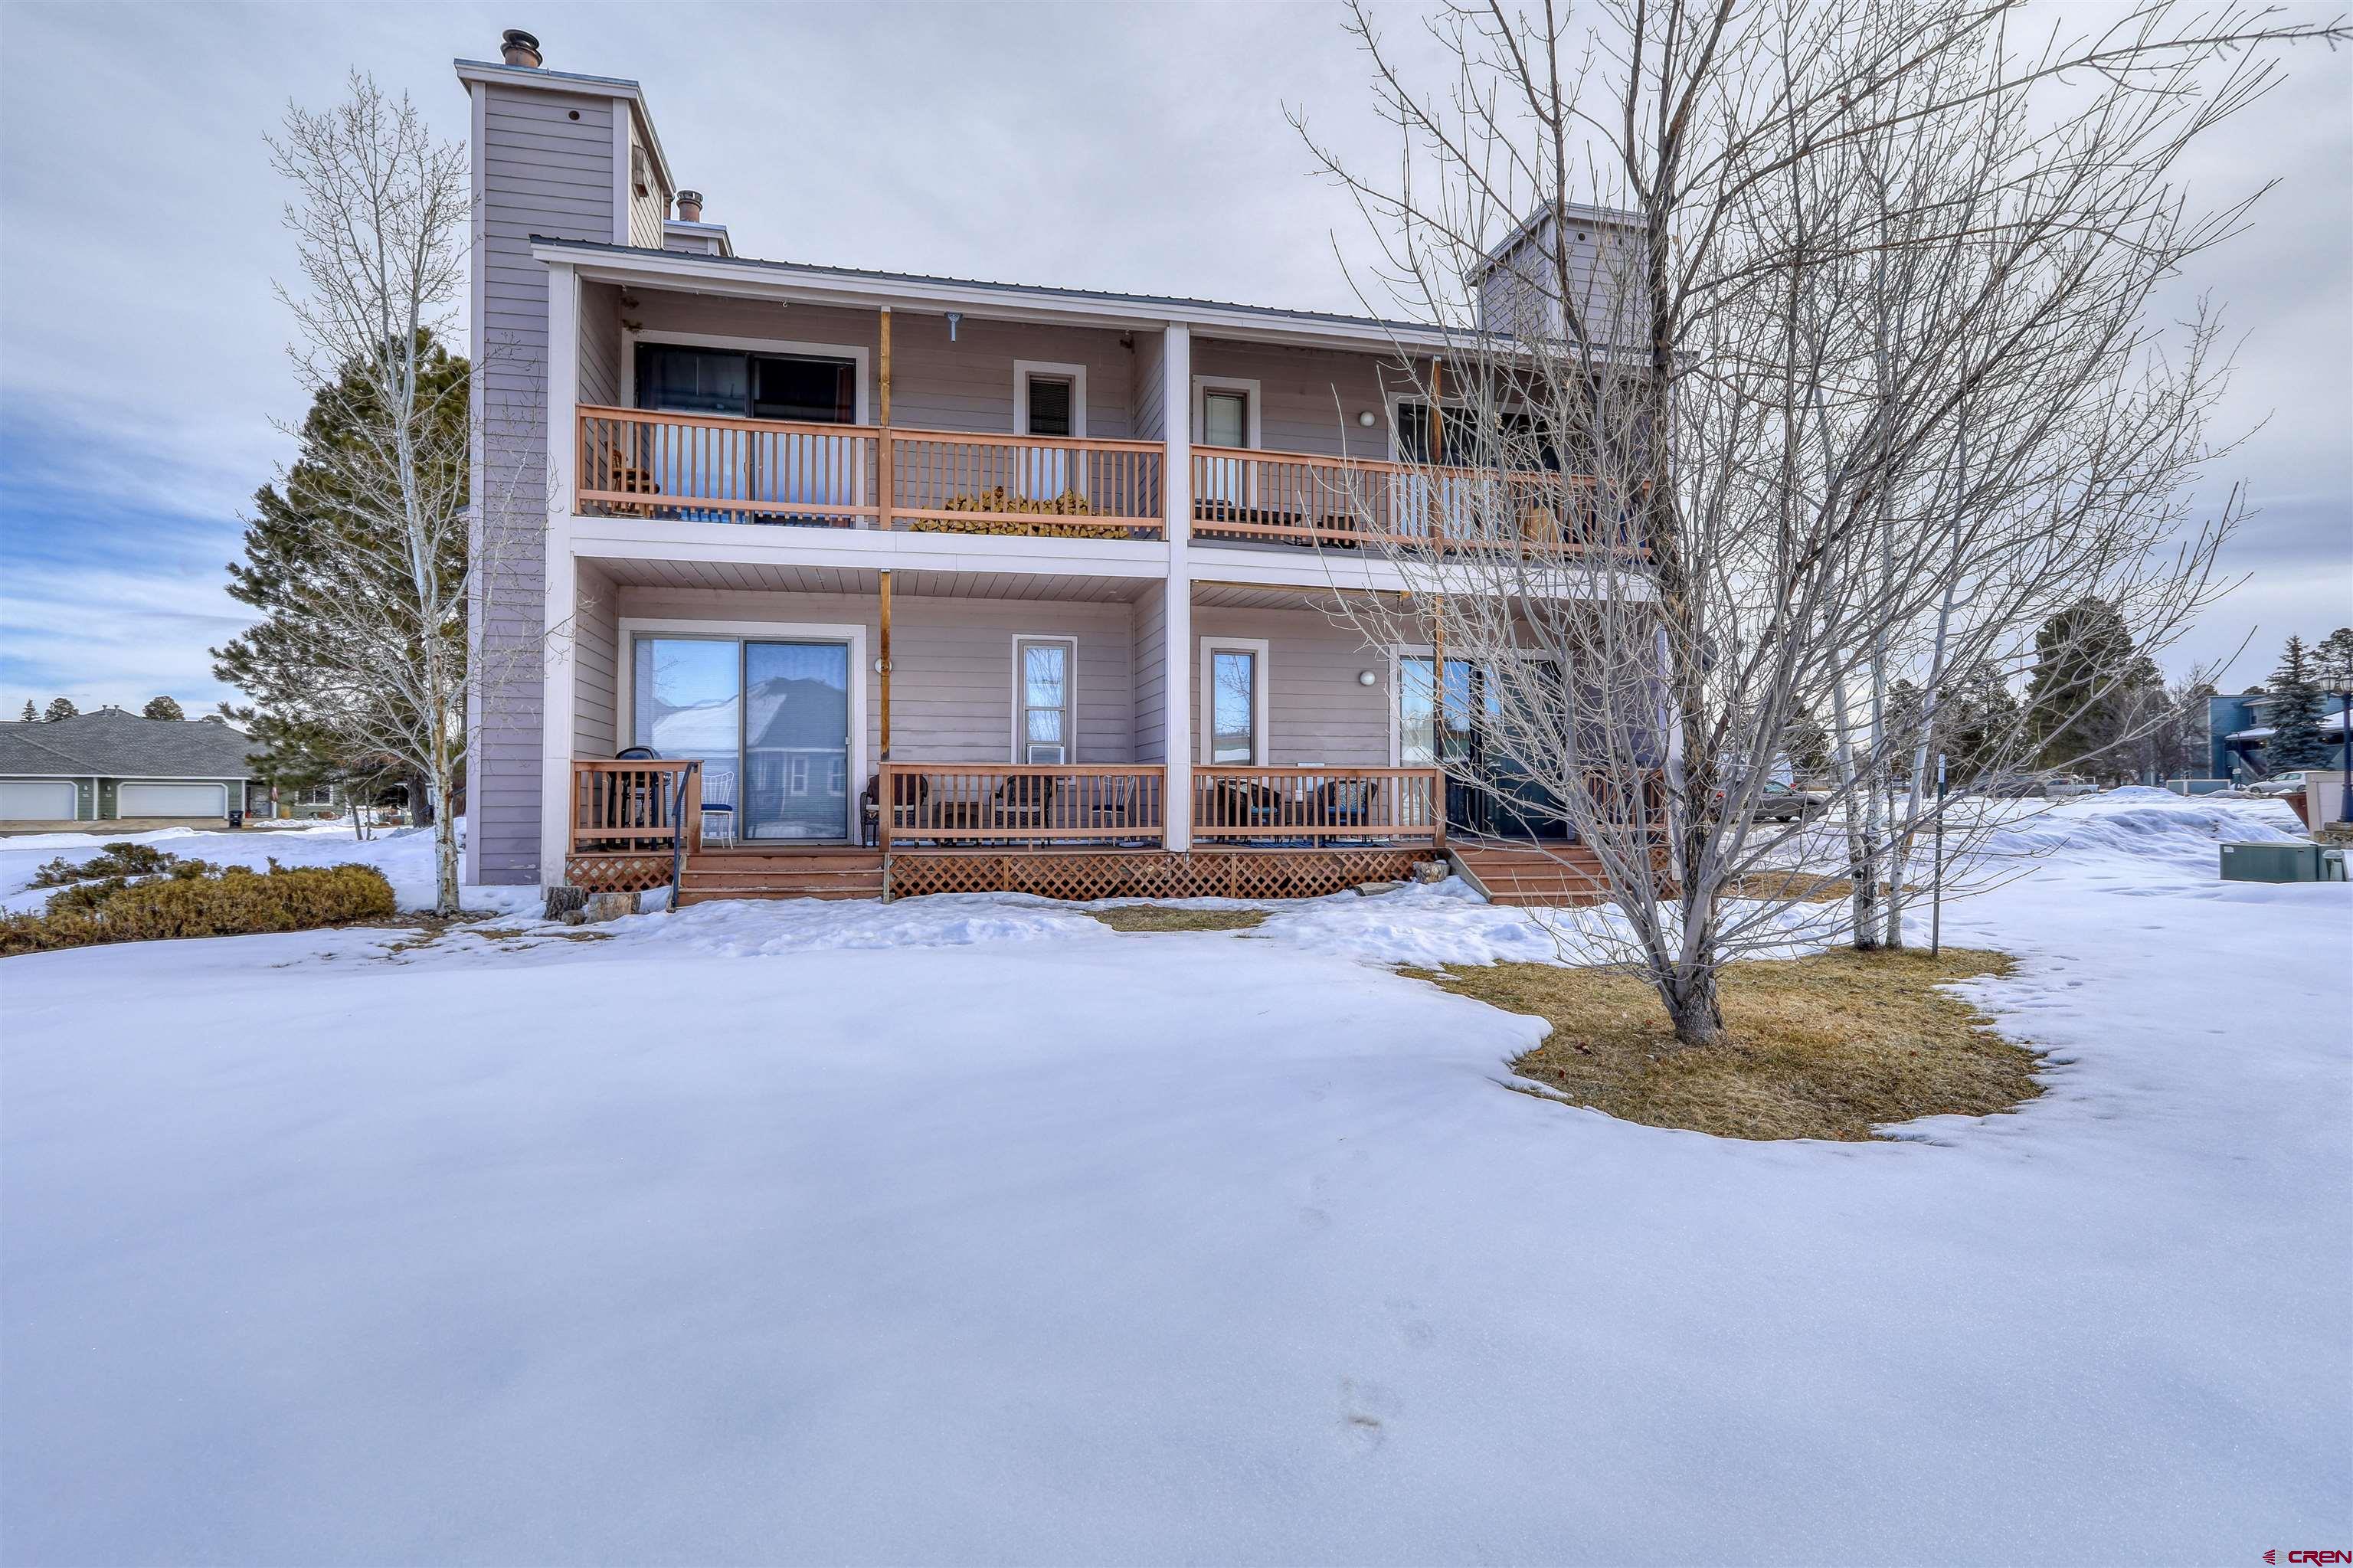 89 Valley View Drive, #3197, Pagosa Springs, CO 81147 Listing Photo  27